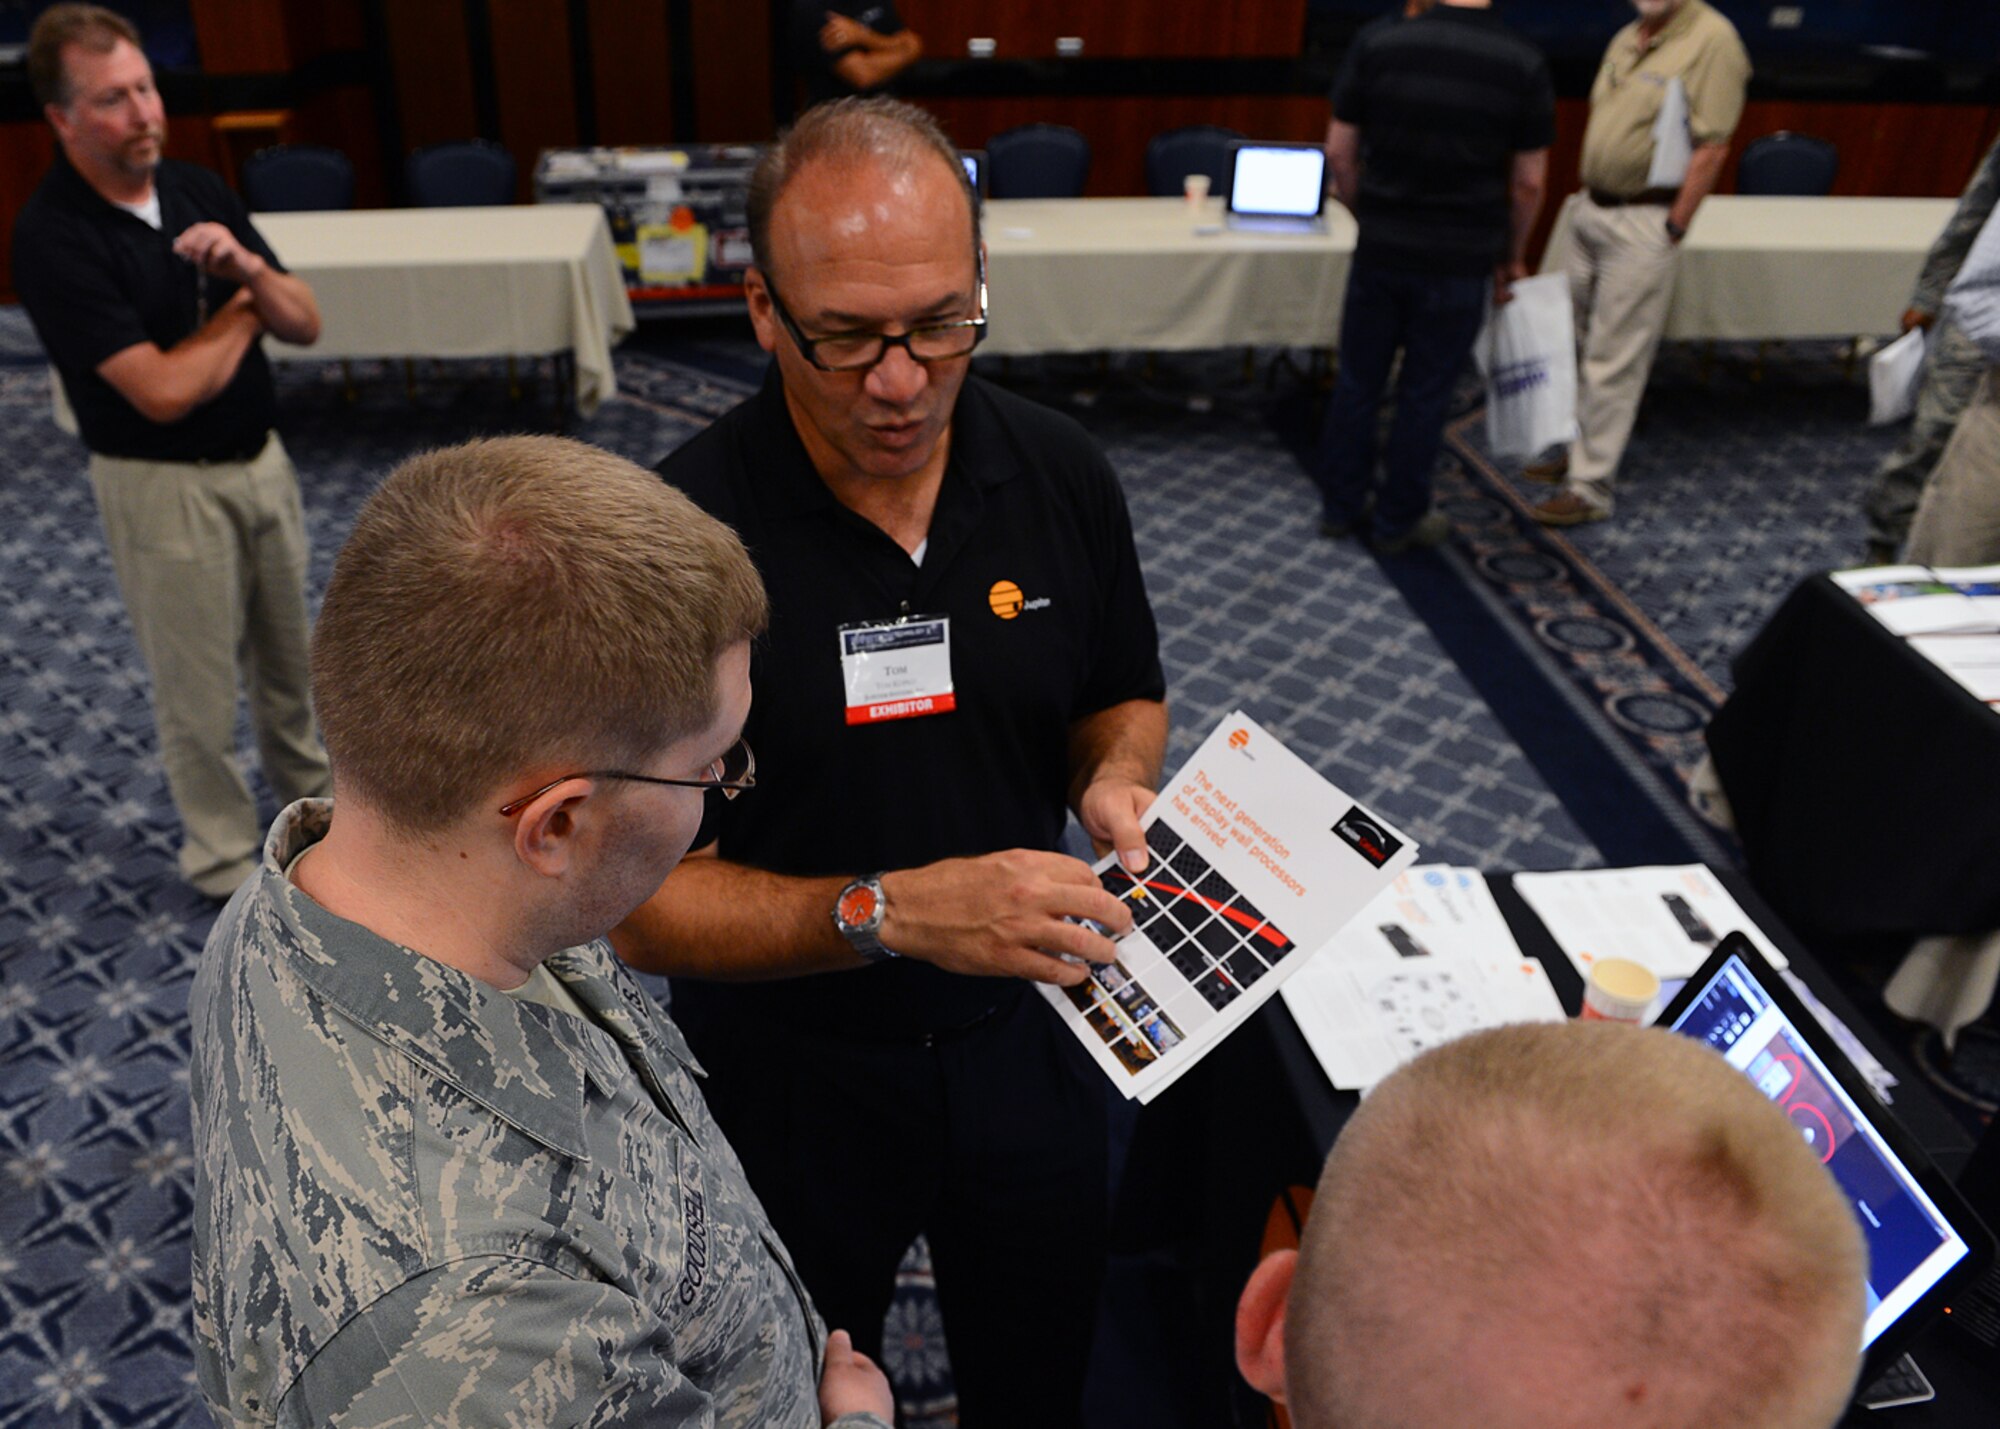 SPANGDAHLEM AIR BASE, Germany -- Tom Kopko, federal business development for Jupiter Systems, discusses his company's capabilities for network-based visual information collaboration with U.S. Air Force Staff Sgts. Josh Milller and Josh Goodsell, both from the 52nd Communications Squadron, at the 2013 Spangdahlem Technology Expo July 24, 2013. The Jupiter Systems demonstration included multiple-video displays intended for Defense Department operations centers. More than 25 exhibitors showcased their wares during the four-hour event. (U.S. Air Force photo by Staff Sgt. Daryl Knee/Released)